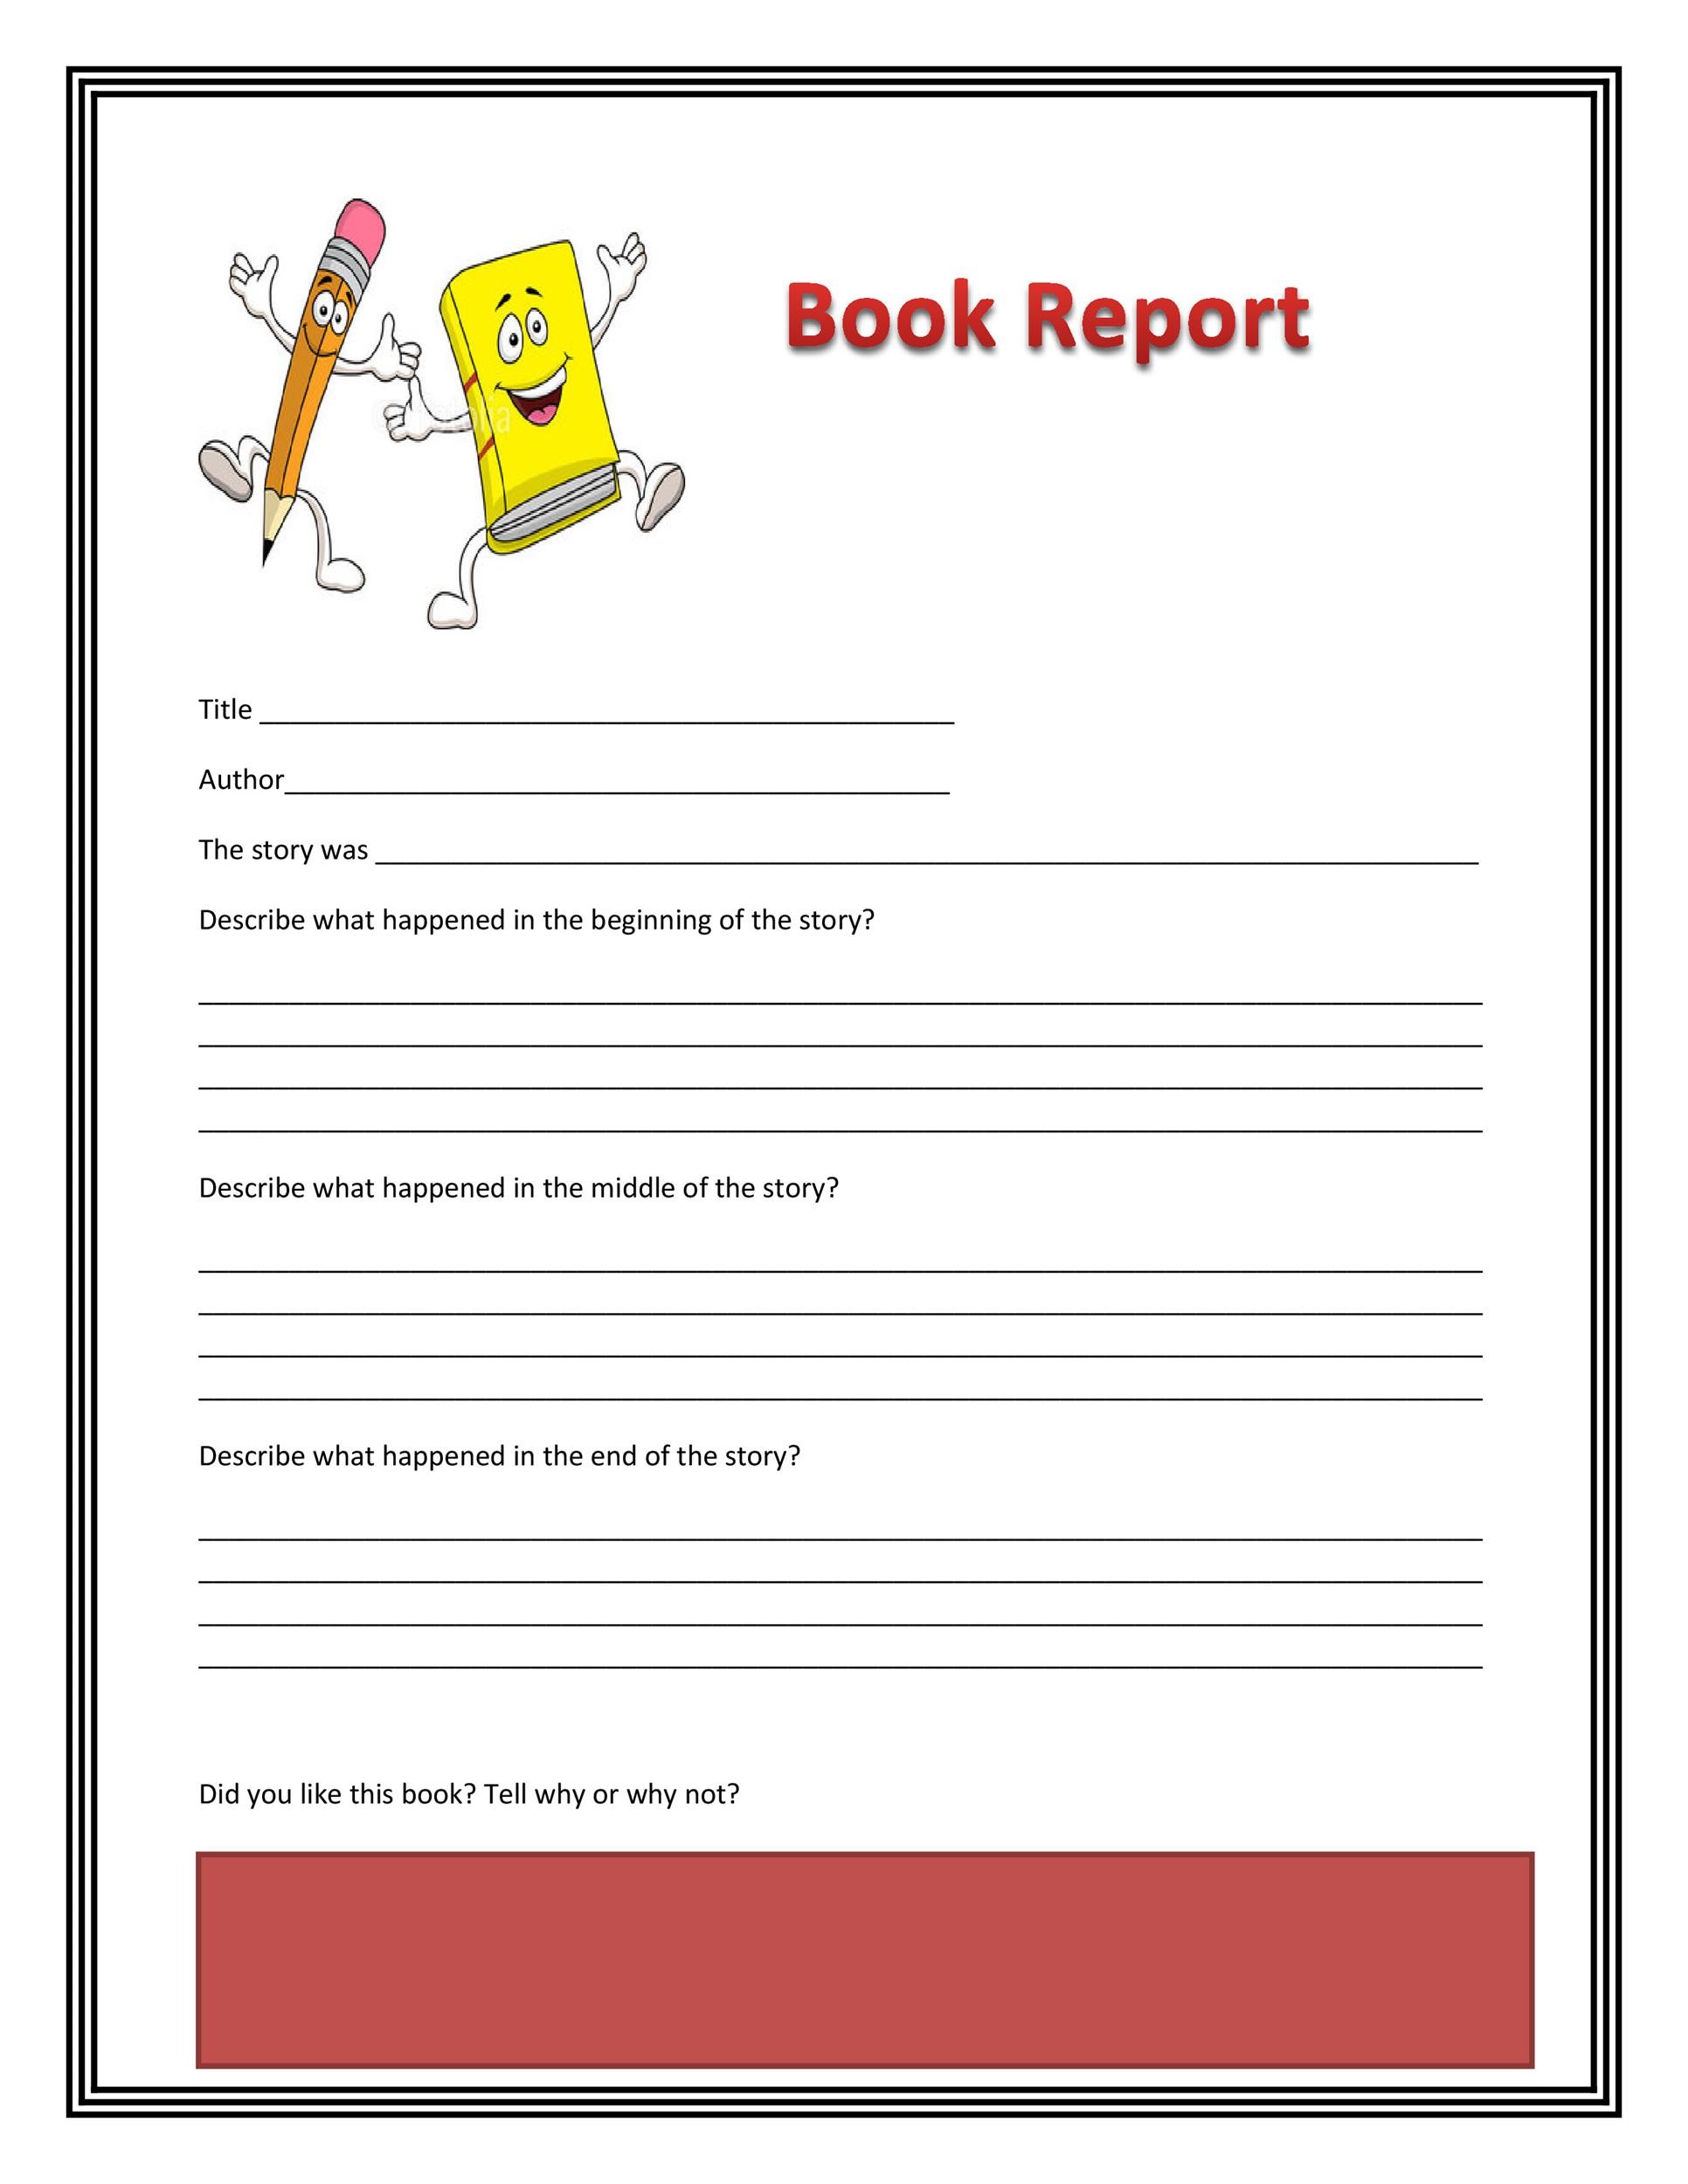 Free Printable Book Report Forms_93314